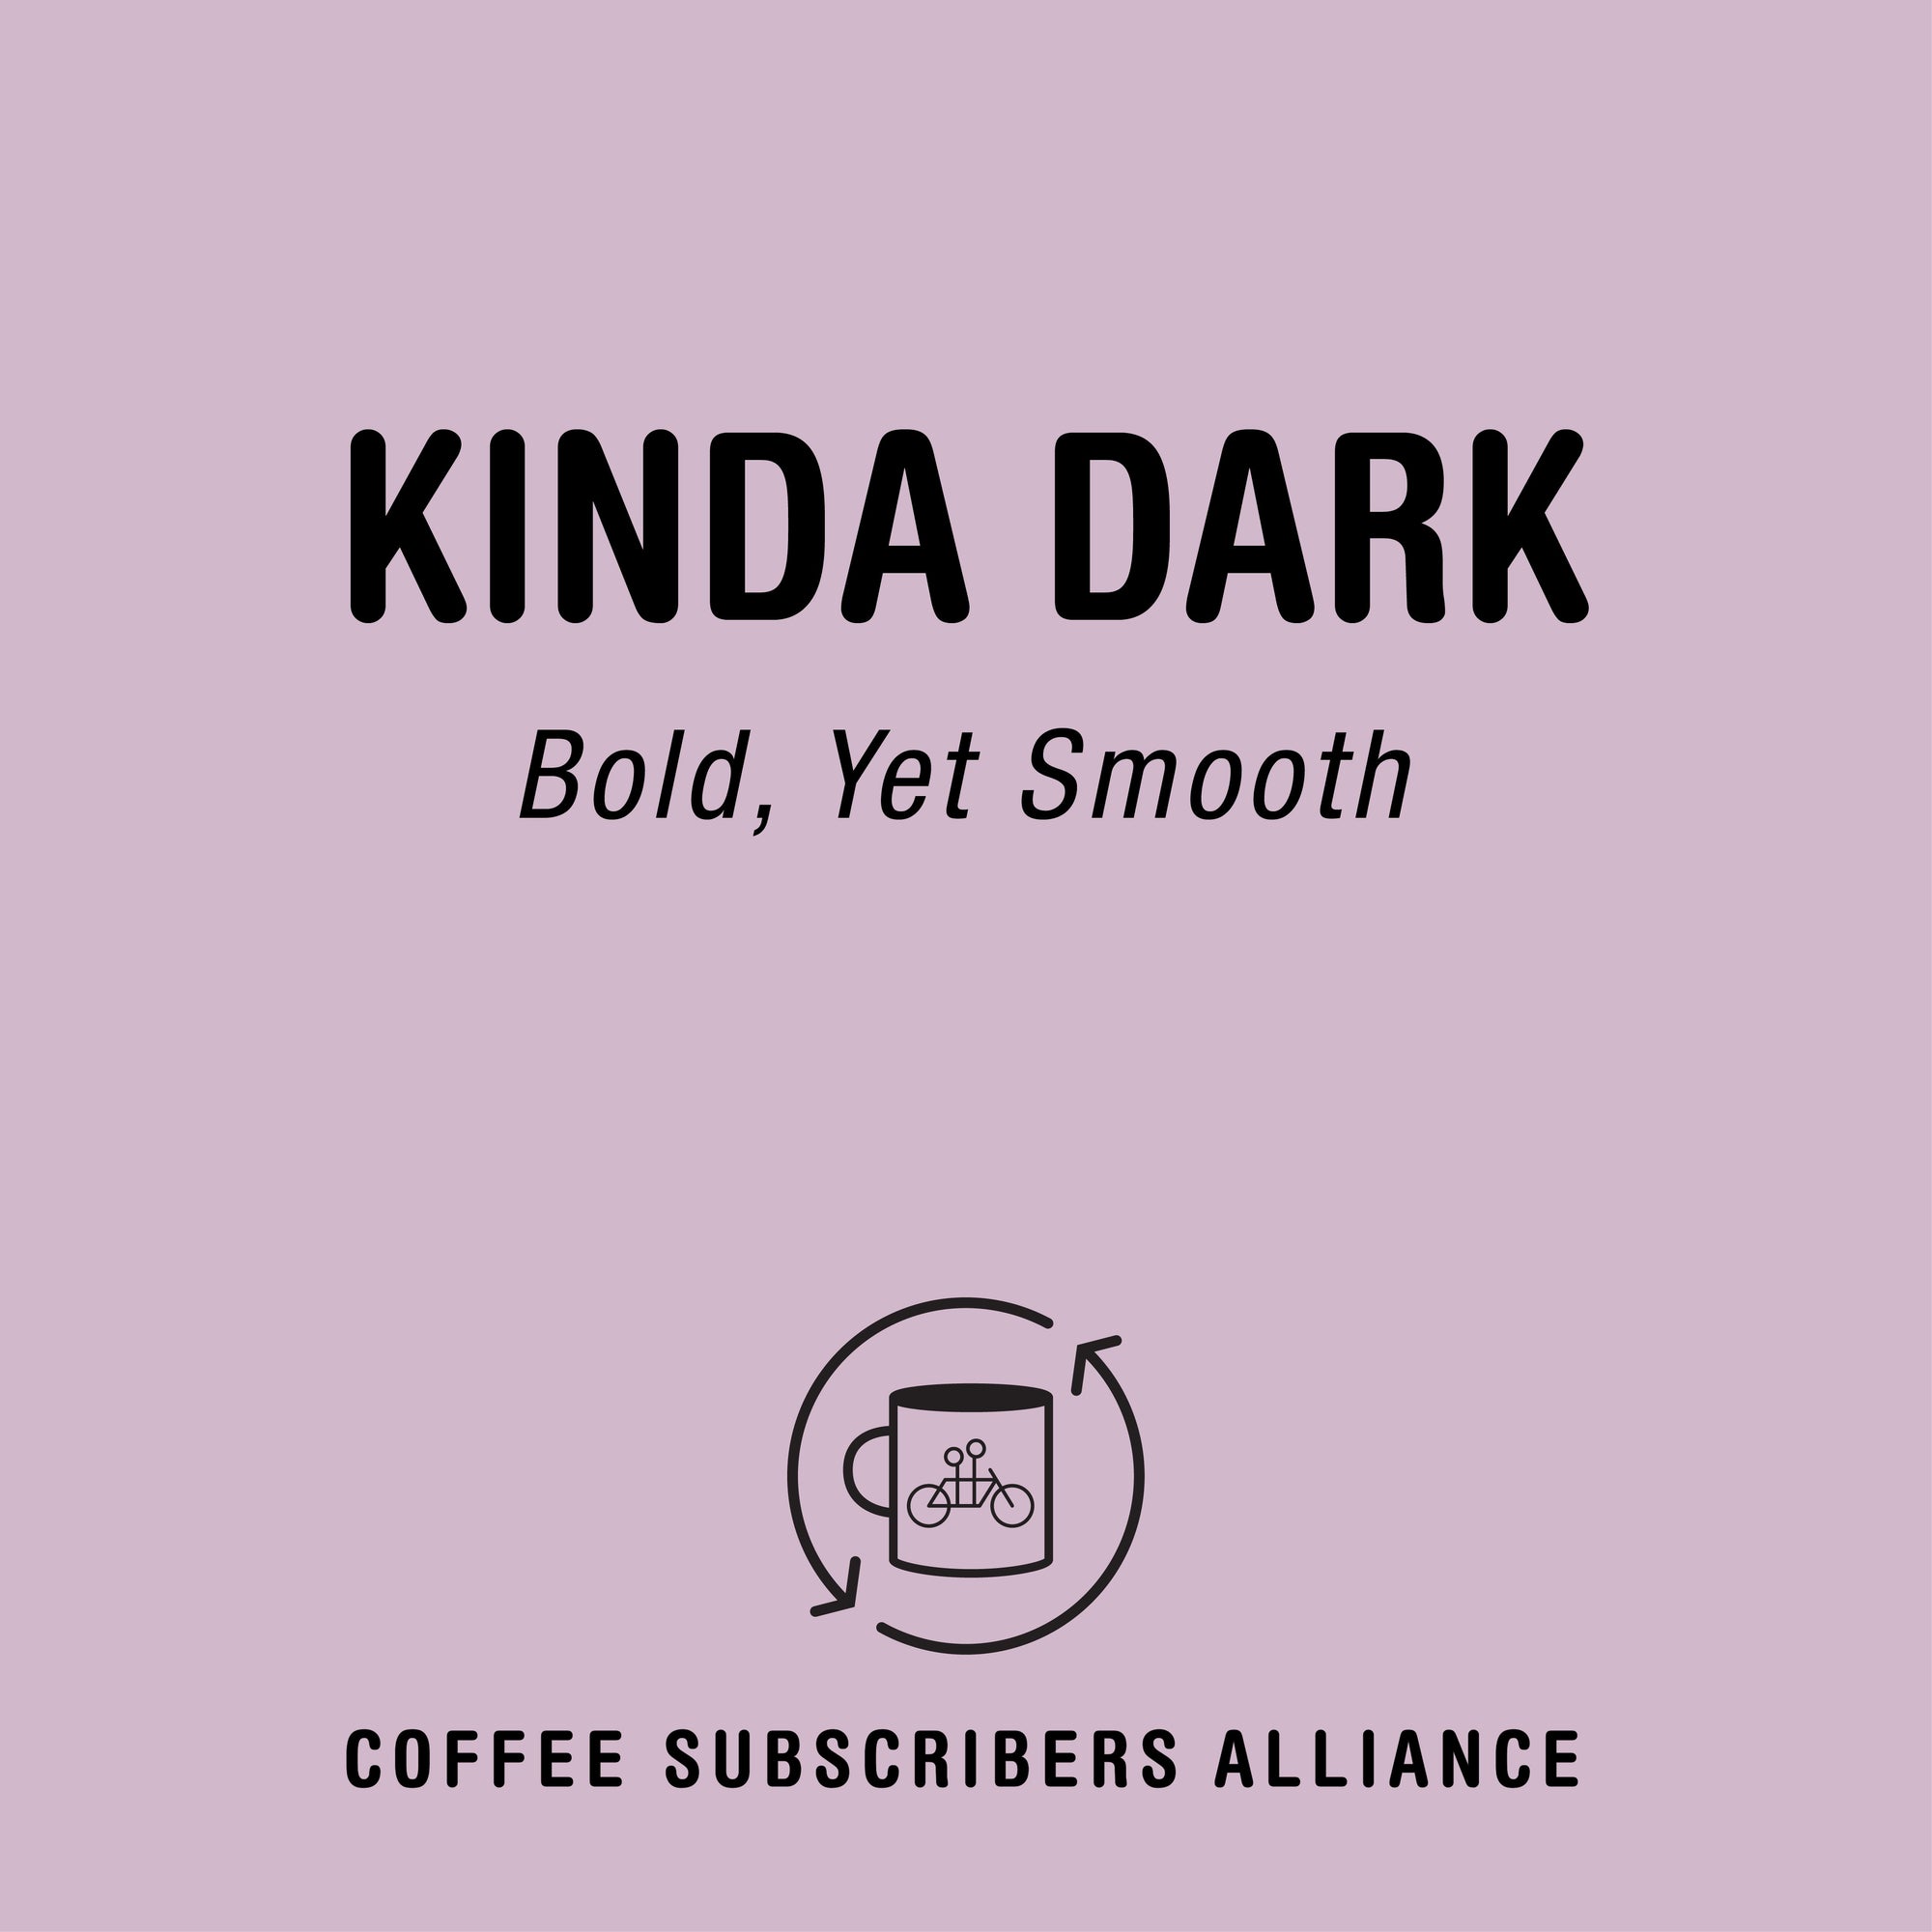 A graphic with a light purple background featuring text "Kinda Dark Subscription Gift - 4 Weeks x 6" at the top and "subscription coffee alliance" at the bottom, with a logo of a cup with coffee beans